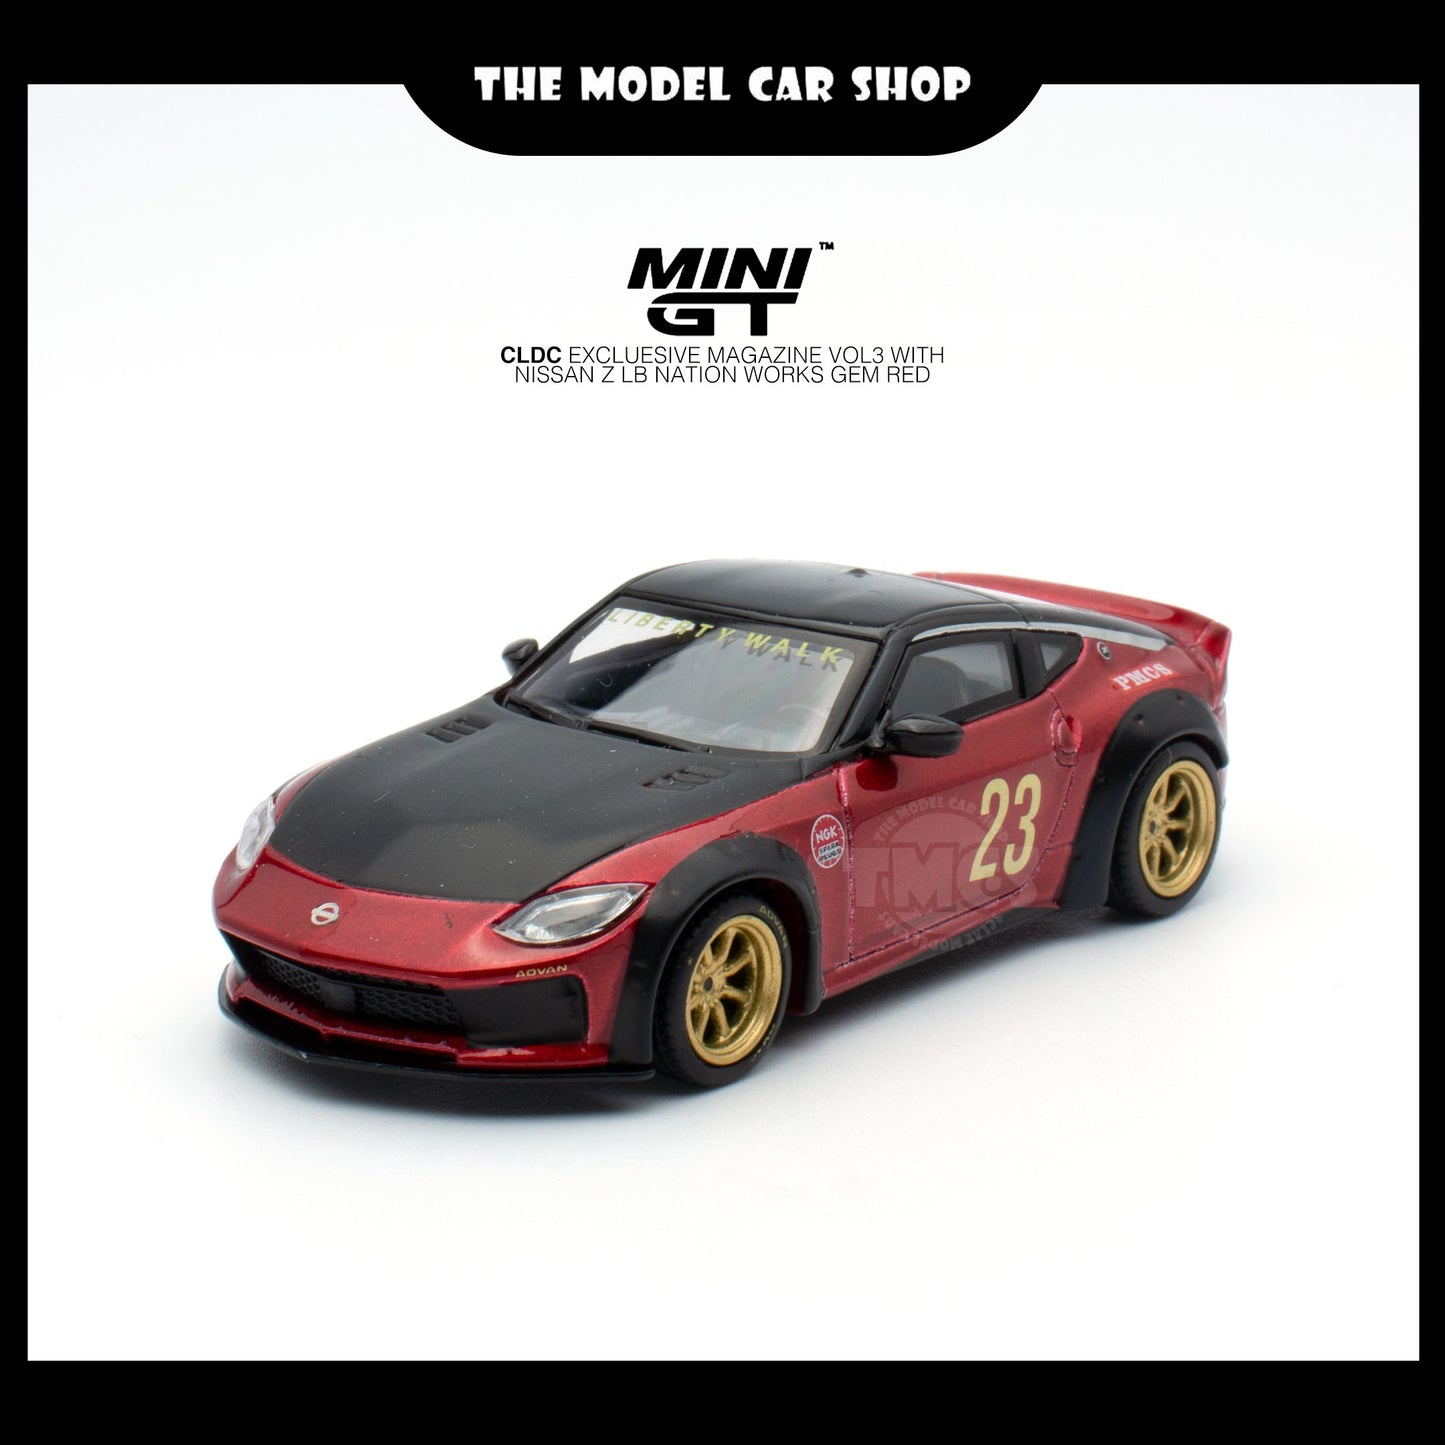 [MINI GT] CLDC Exclusive Magazine VOL3 with Nissan Z LB Nation Works Gem Red - Chinese Version